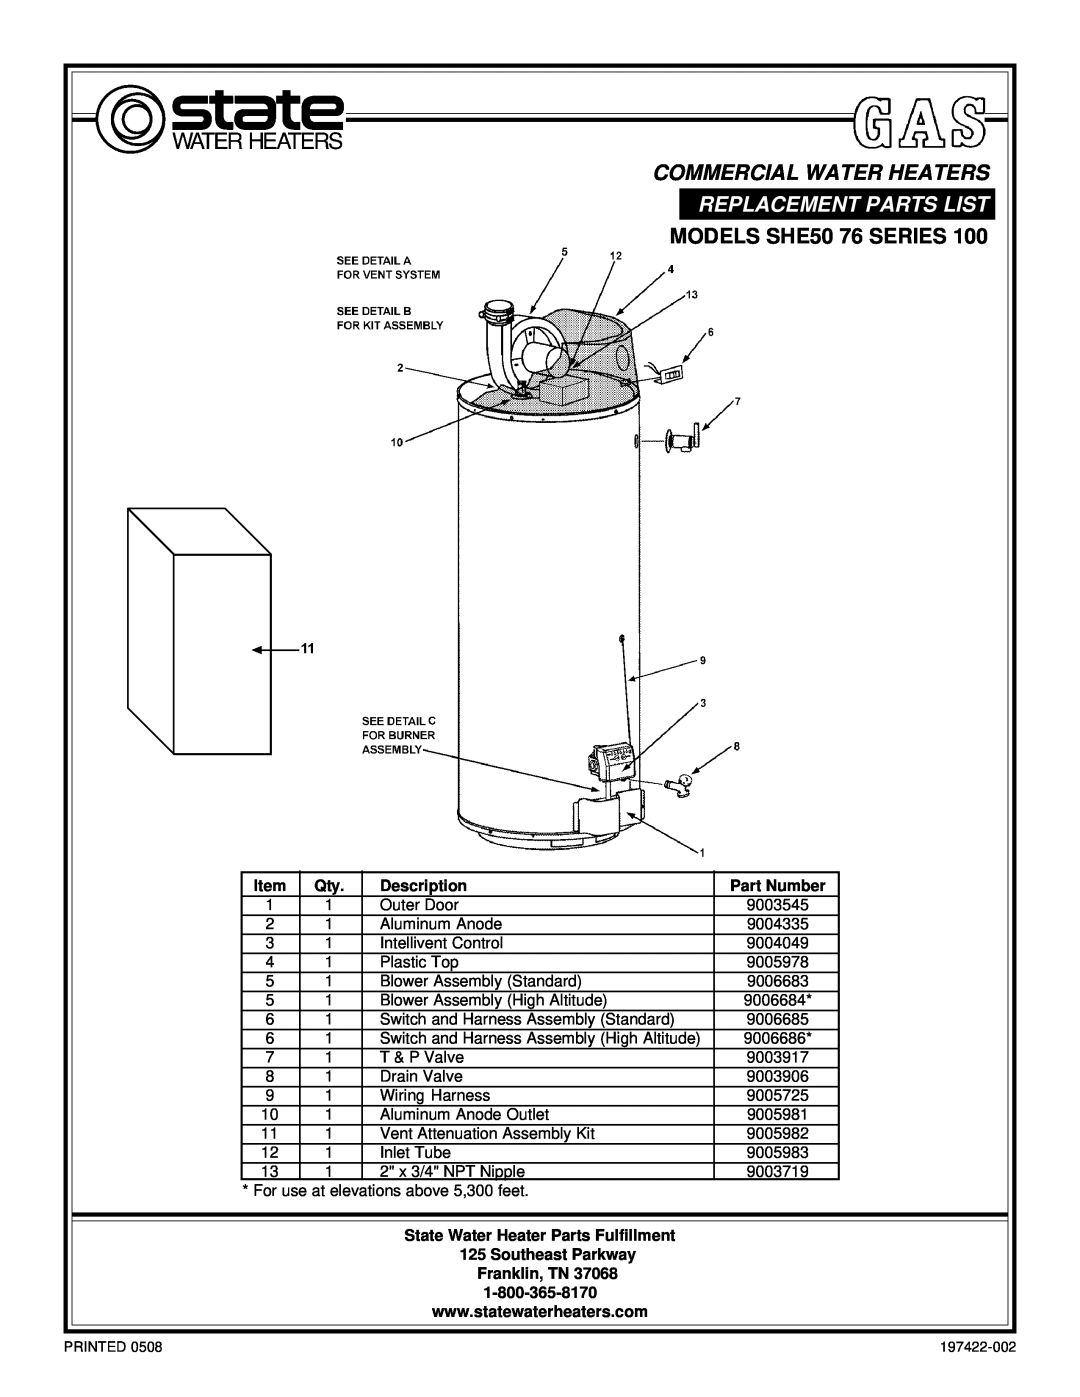 State Industries manual MODELS SHE50 76 SERIES, Description, Part Number, Commercial Water Heaters 